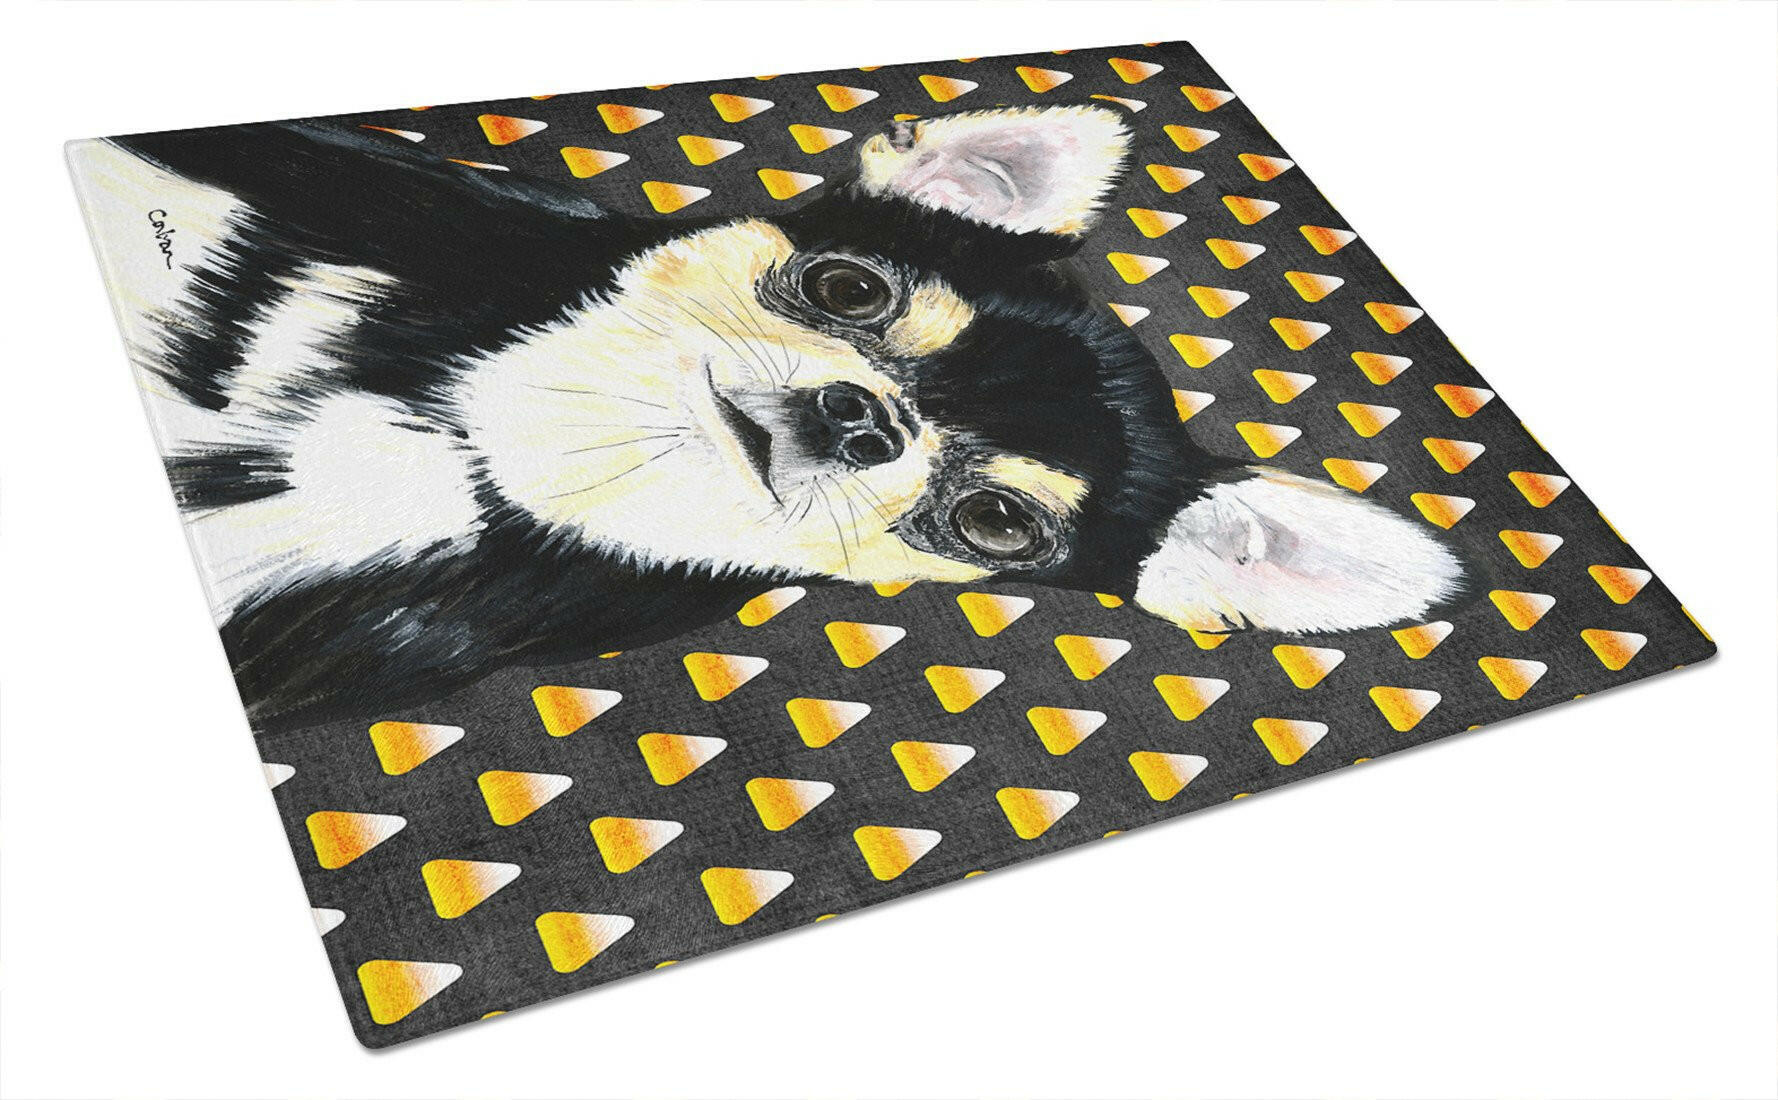 Chihuahua Candy Corn Halloween Portrait Glass Cutting Board Large by Caroline's Treasures